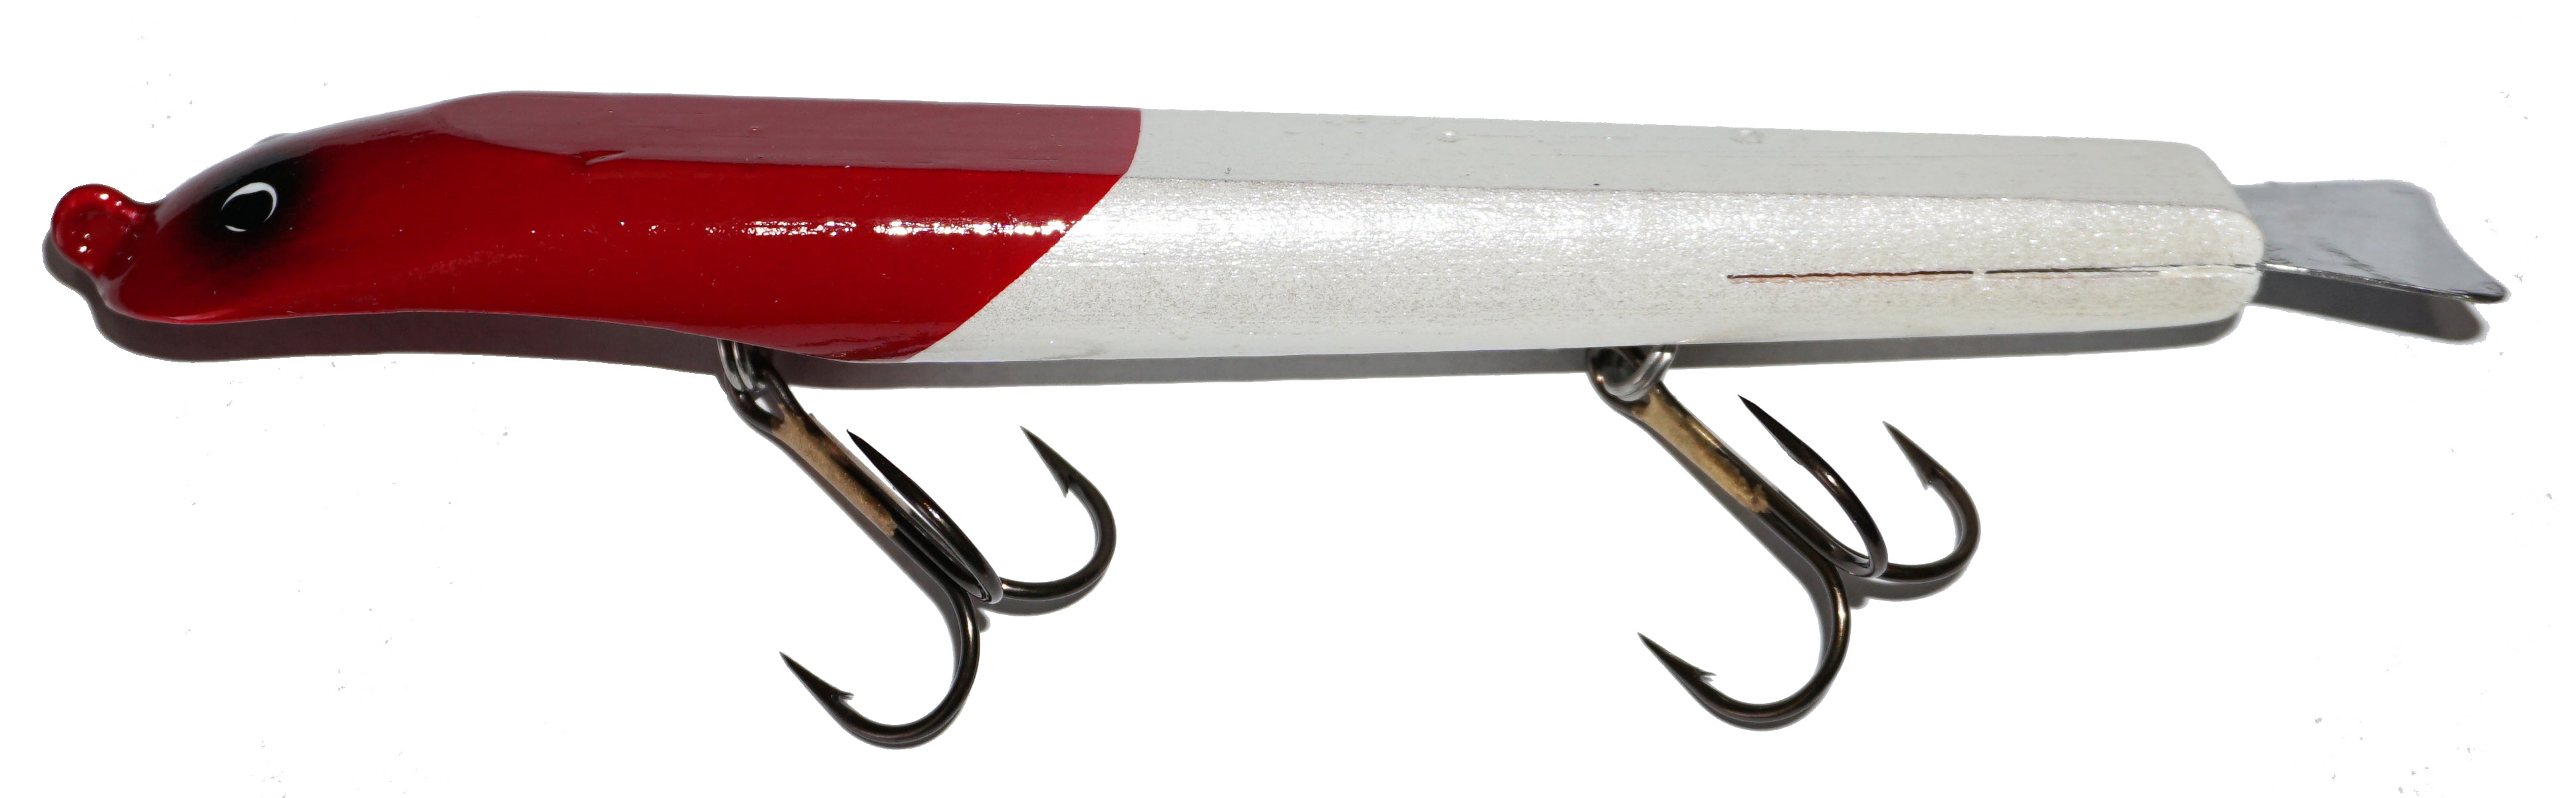 MuskieFIRST  Super Cisco » Lures,Tackle, and Equipment » Muskie